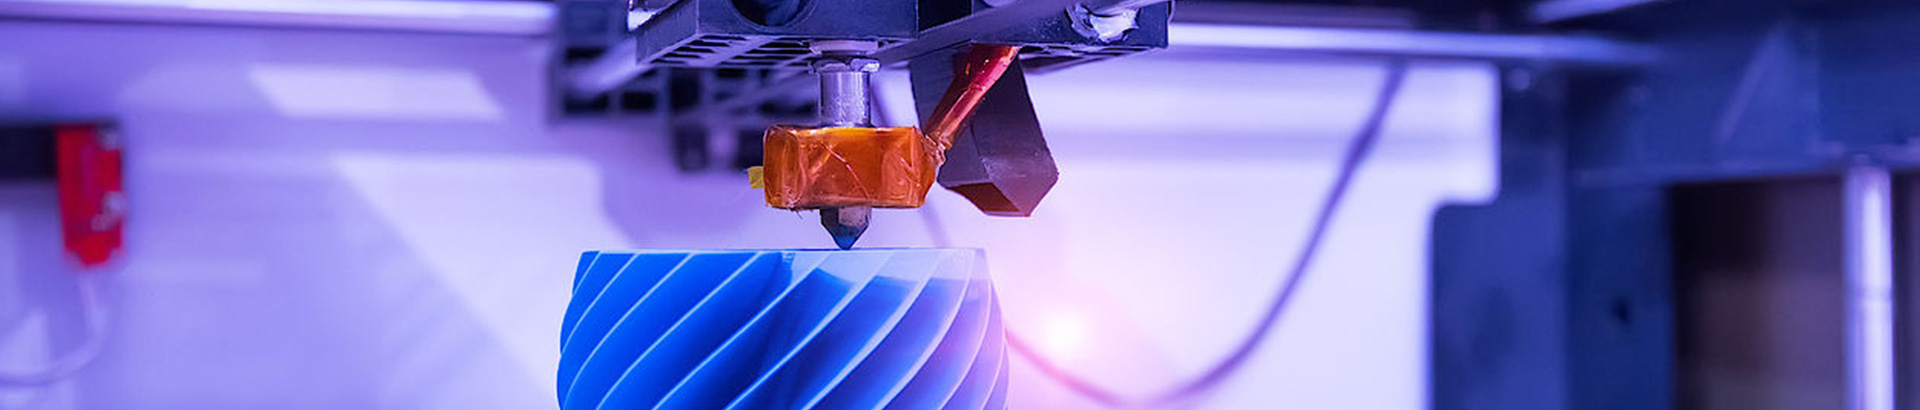 Transforming Metal Manufacturing: Shifting from Subtraction to Addition - 3D Smart Manufacturing